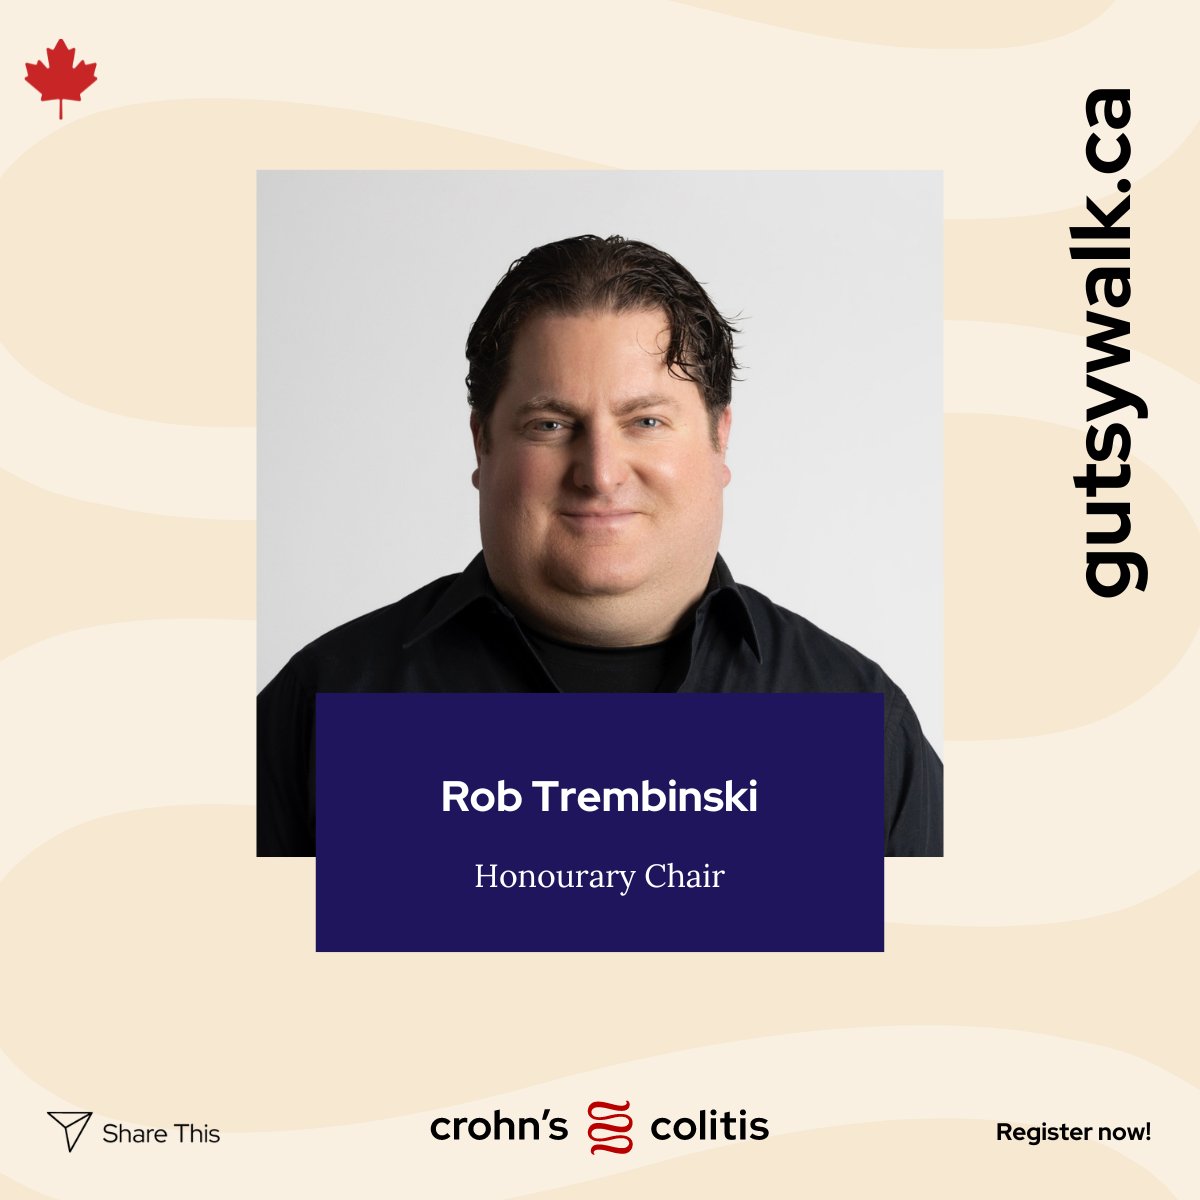 Rob, a #GutsyWalk Honourary Chair, was diagnosed with colitis when he was thirteen years old. His health is stable today, but he will never forget what it was like to live with the urgency to use the washroom. Read Rob’s full story: bit.ly/Honourarychairs